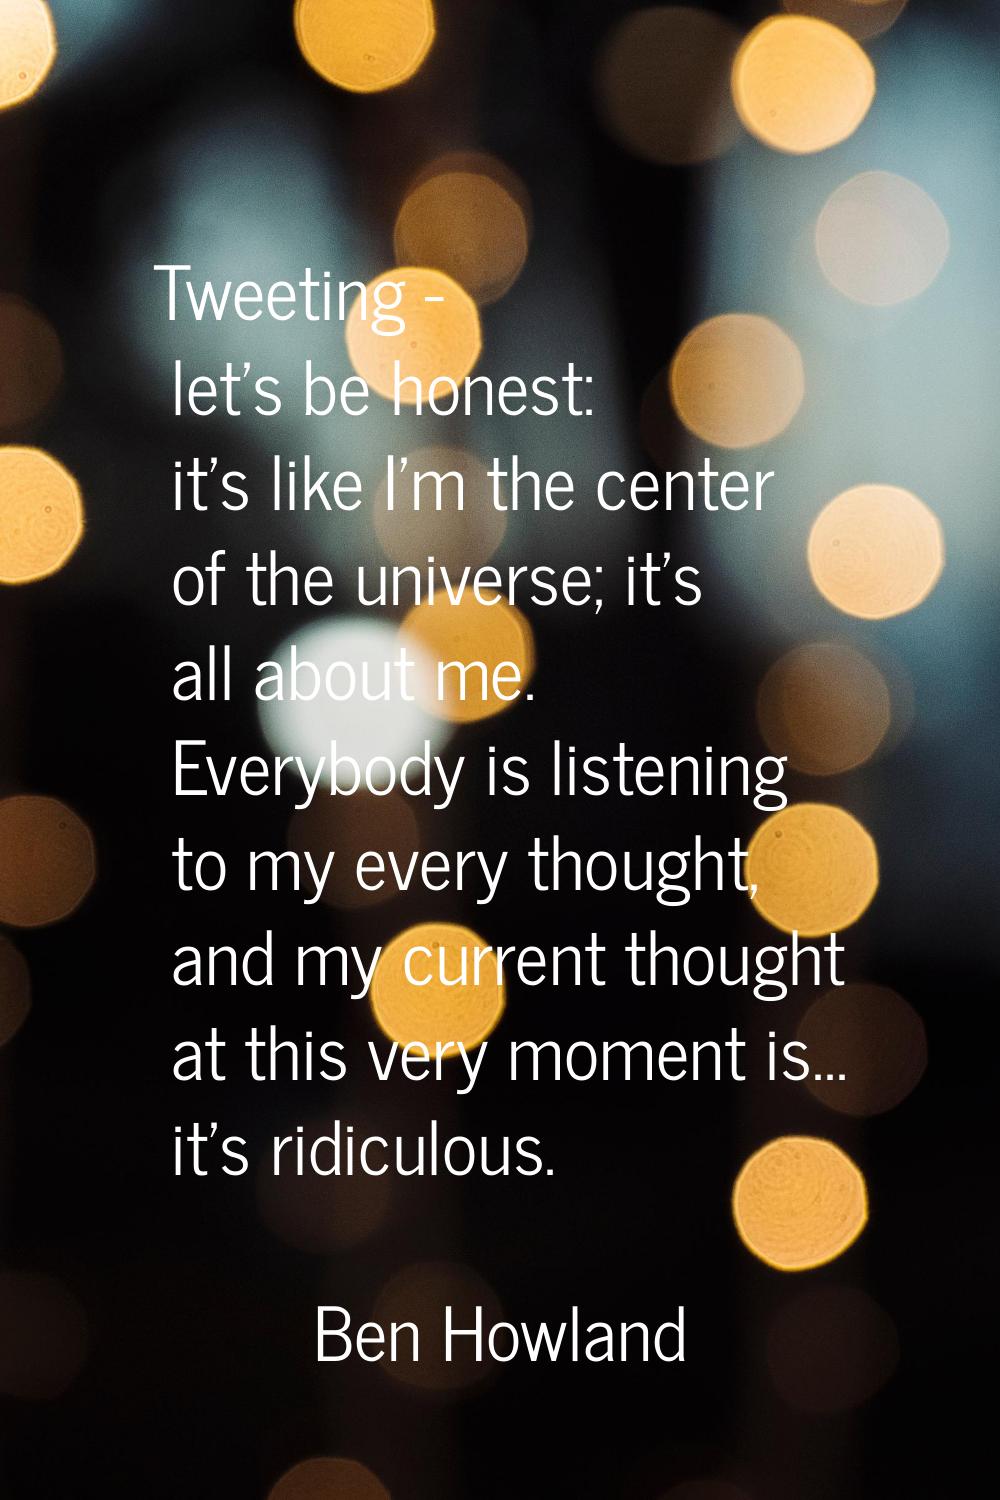 Tweeting - let's be honest: it's like I'm the center of the universe; it's all about me. Everybody 